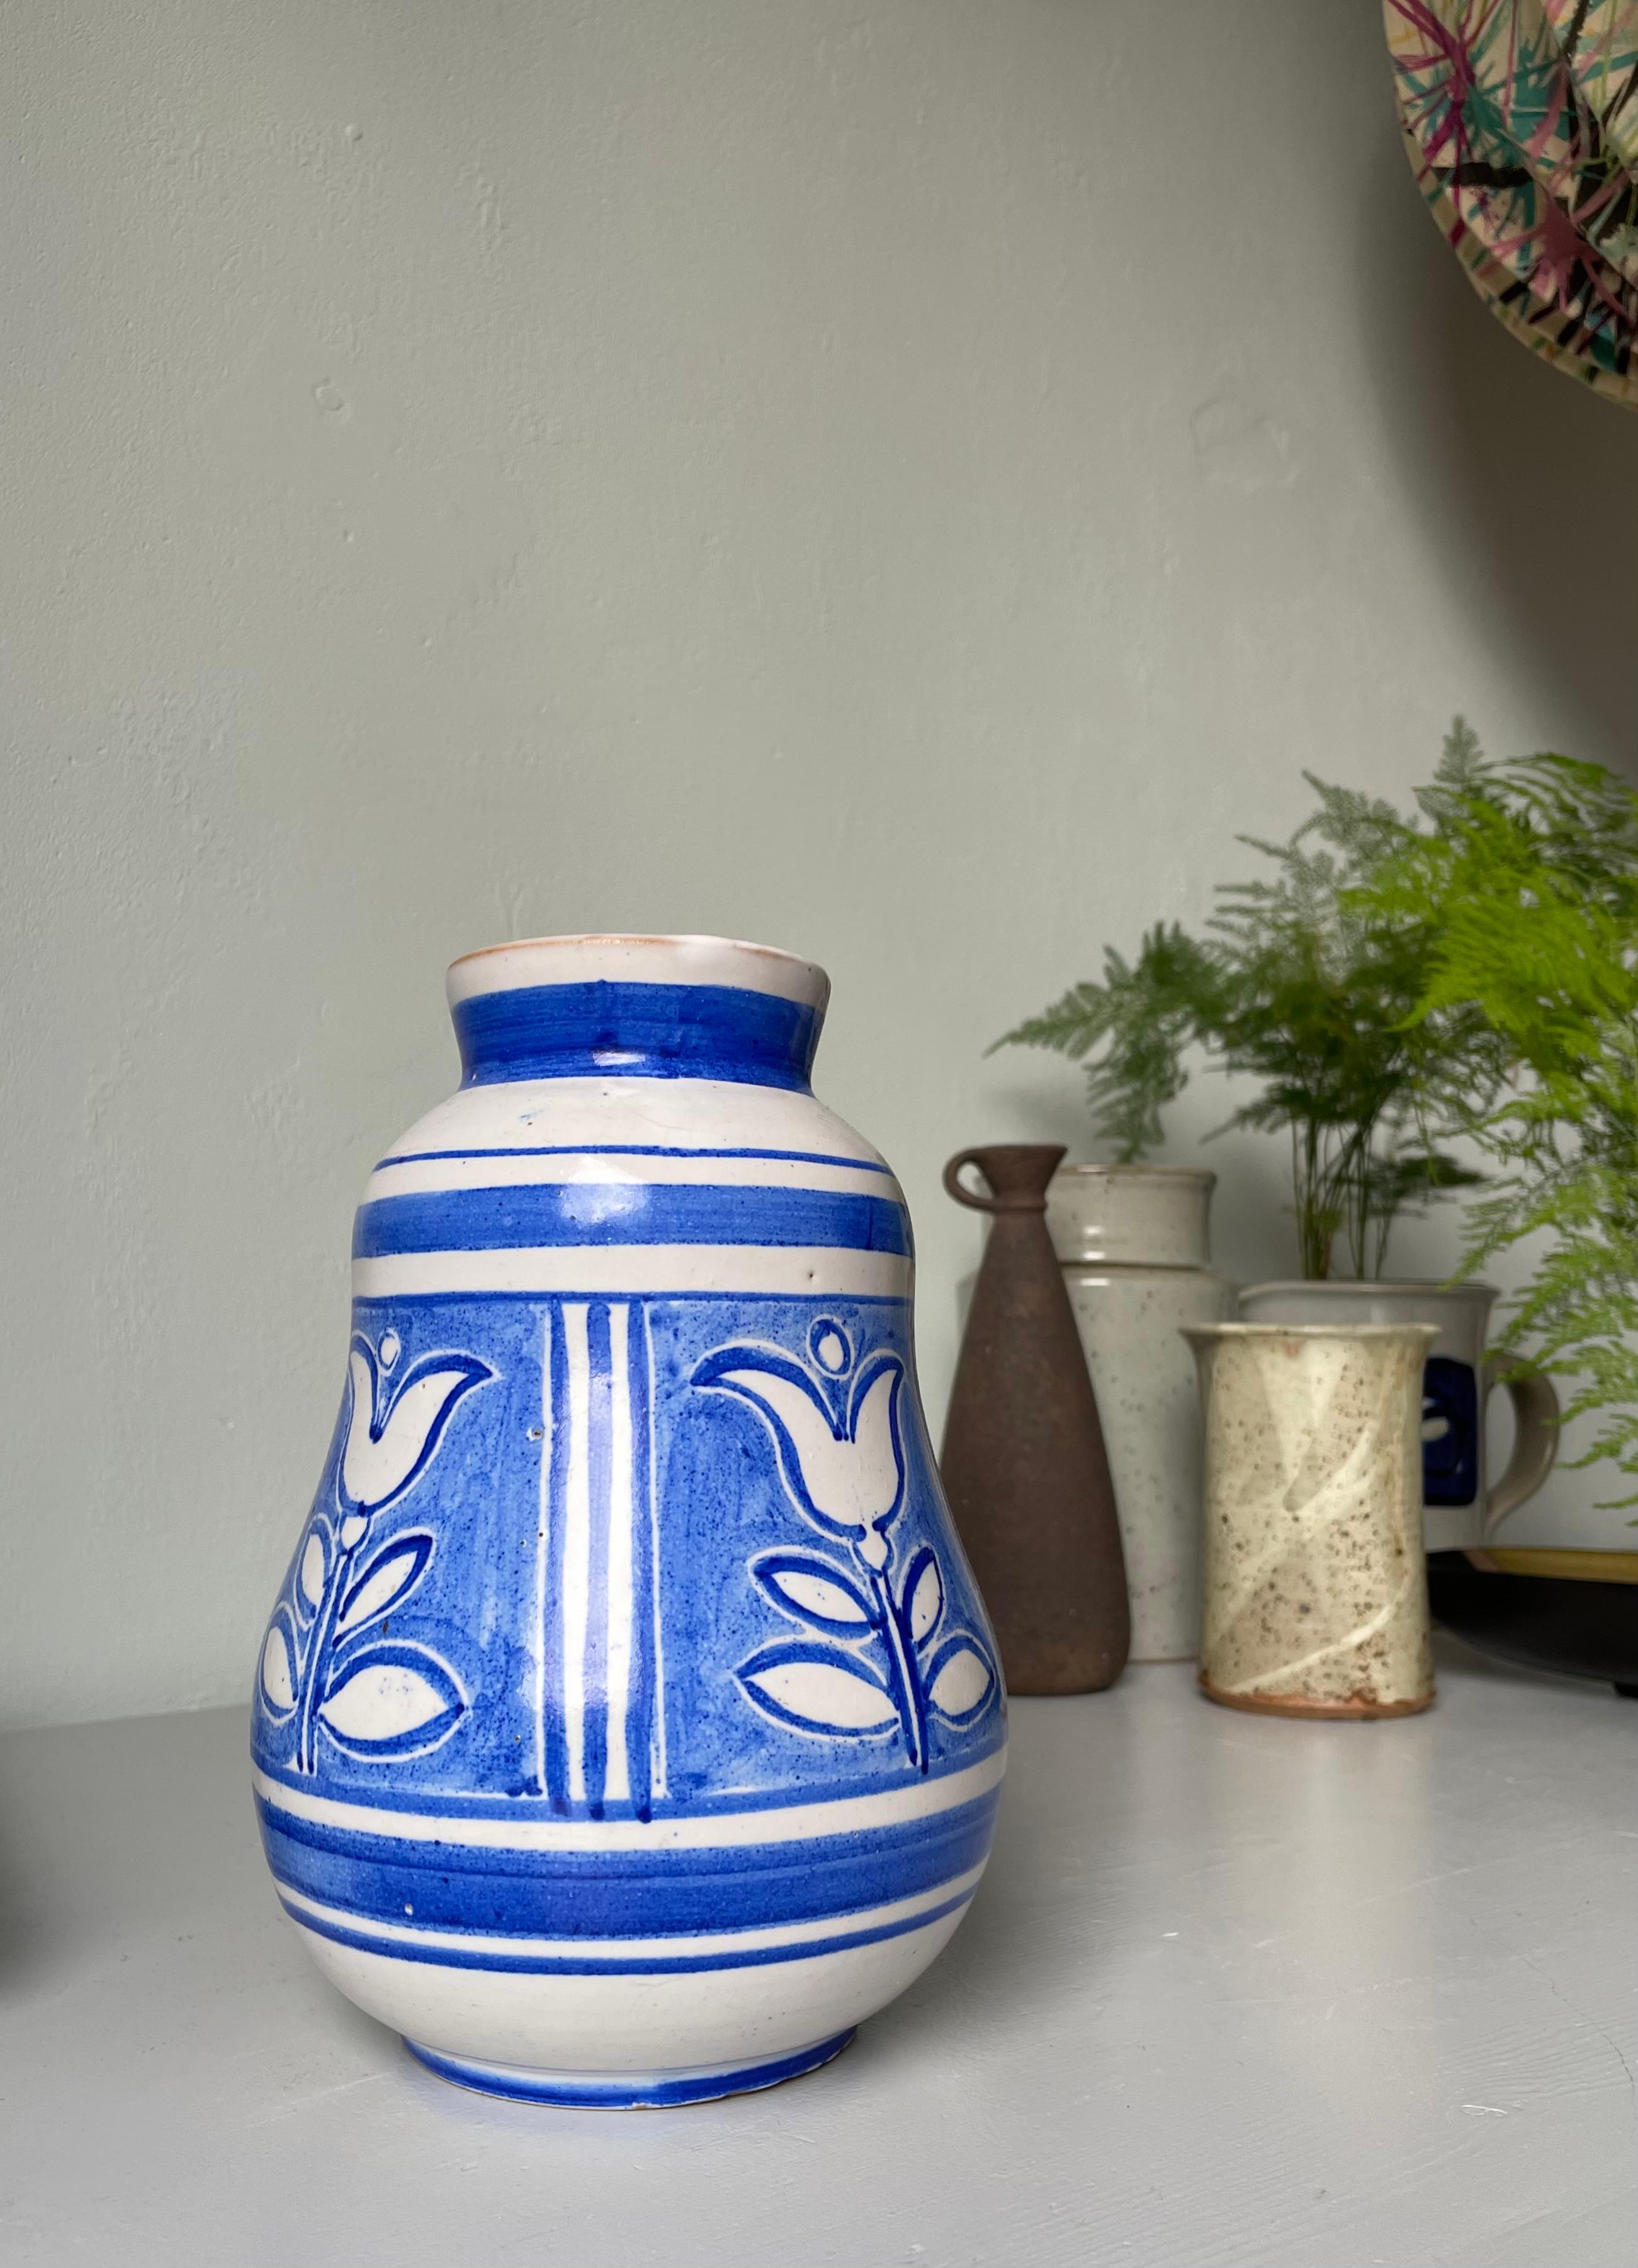 Scandinavian Nordic White Hand-Decorated Blue Floral Ceramic Vase, 1950s For Sale